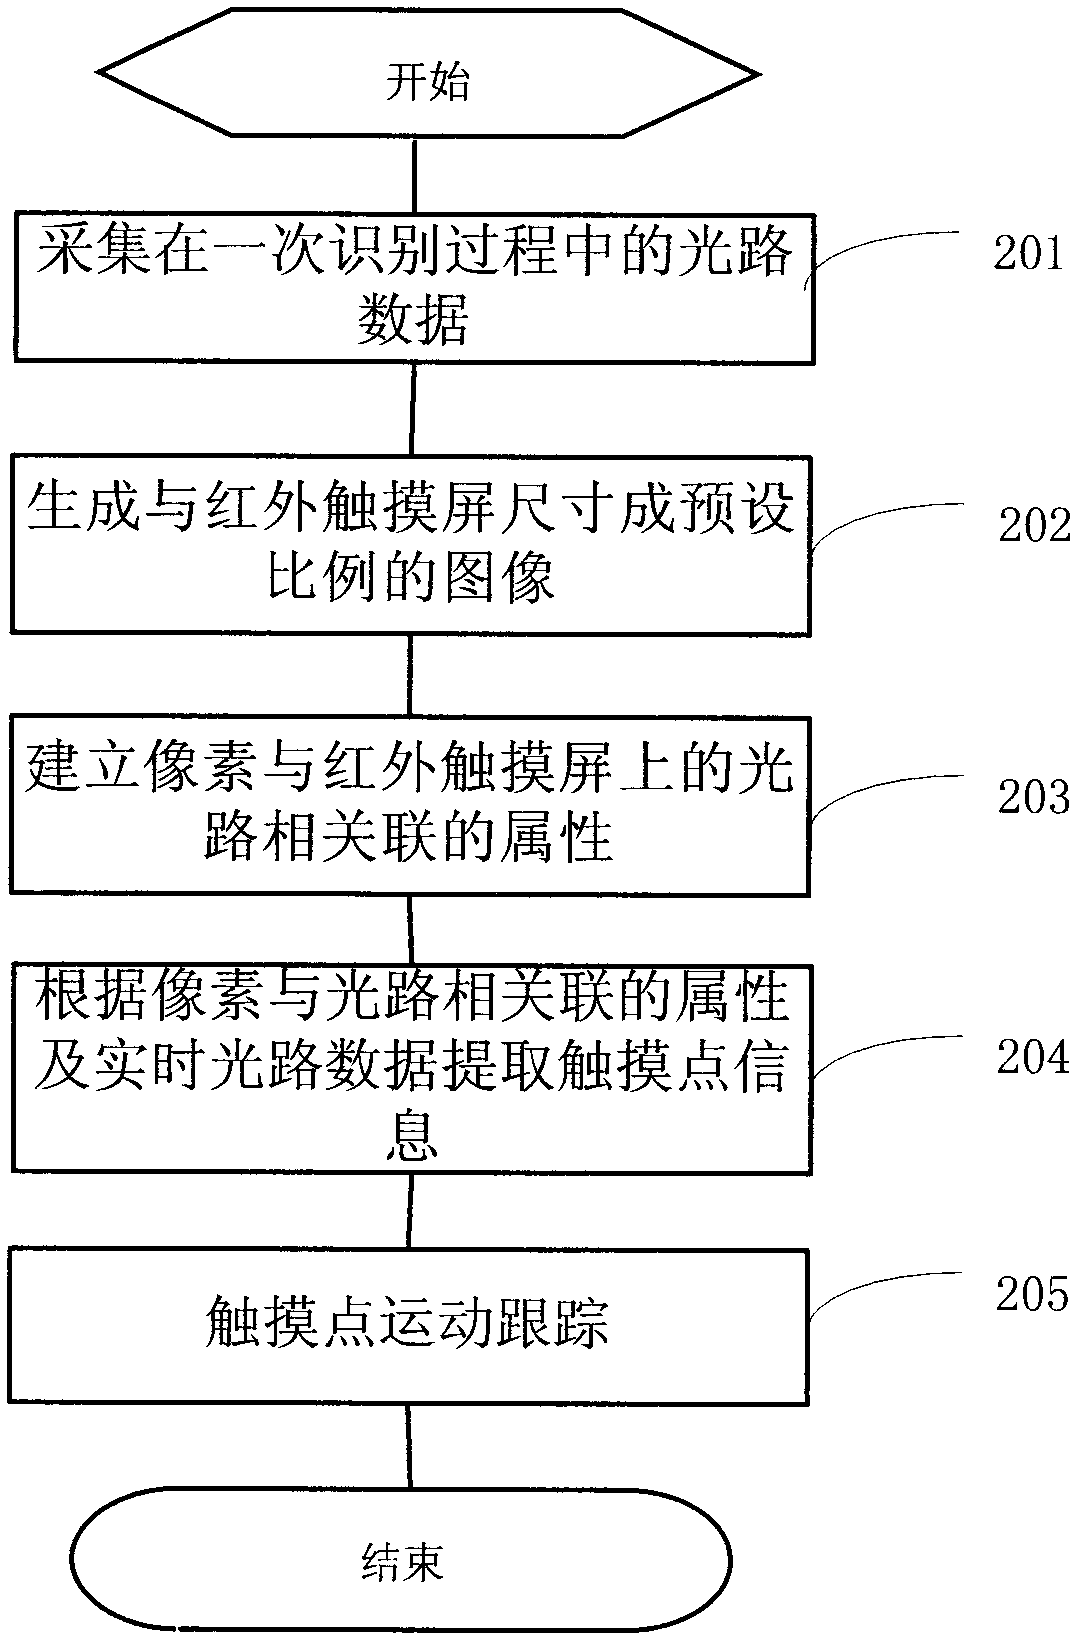 Multipoint identification method and system for infrared touch screen